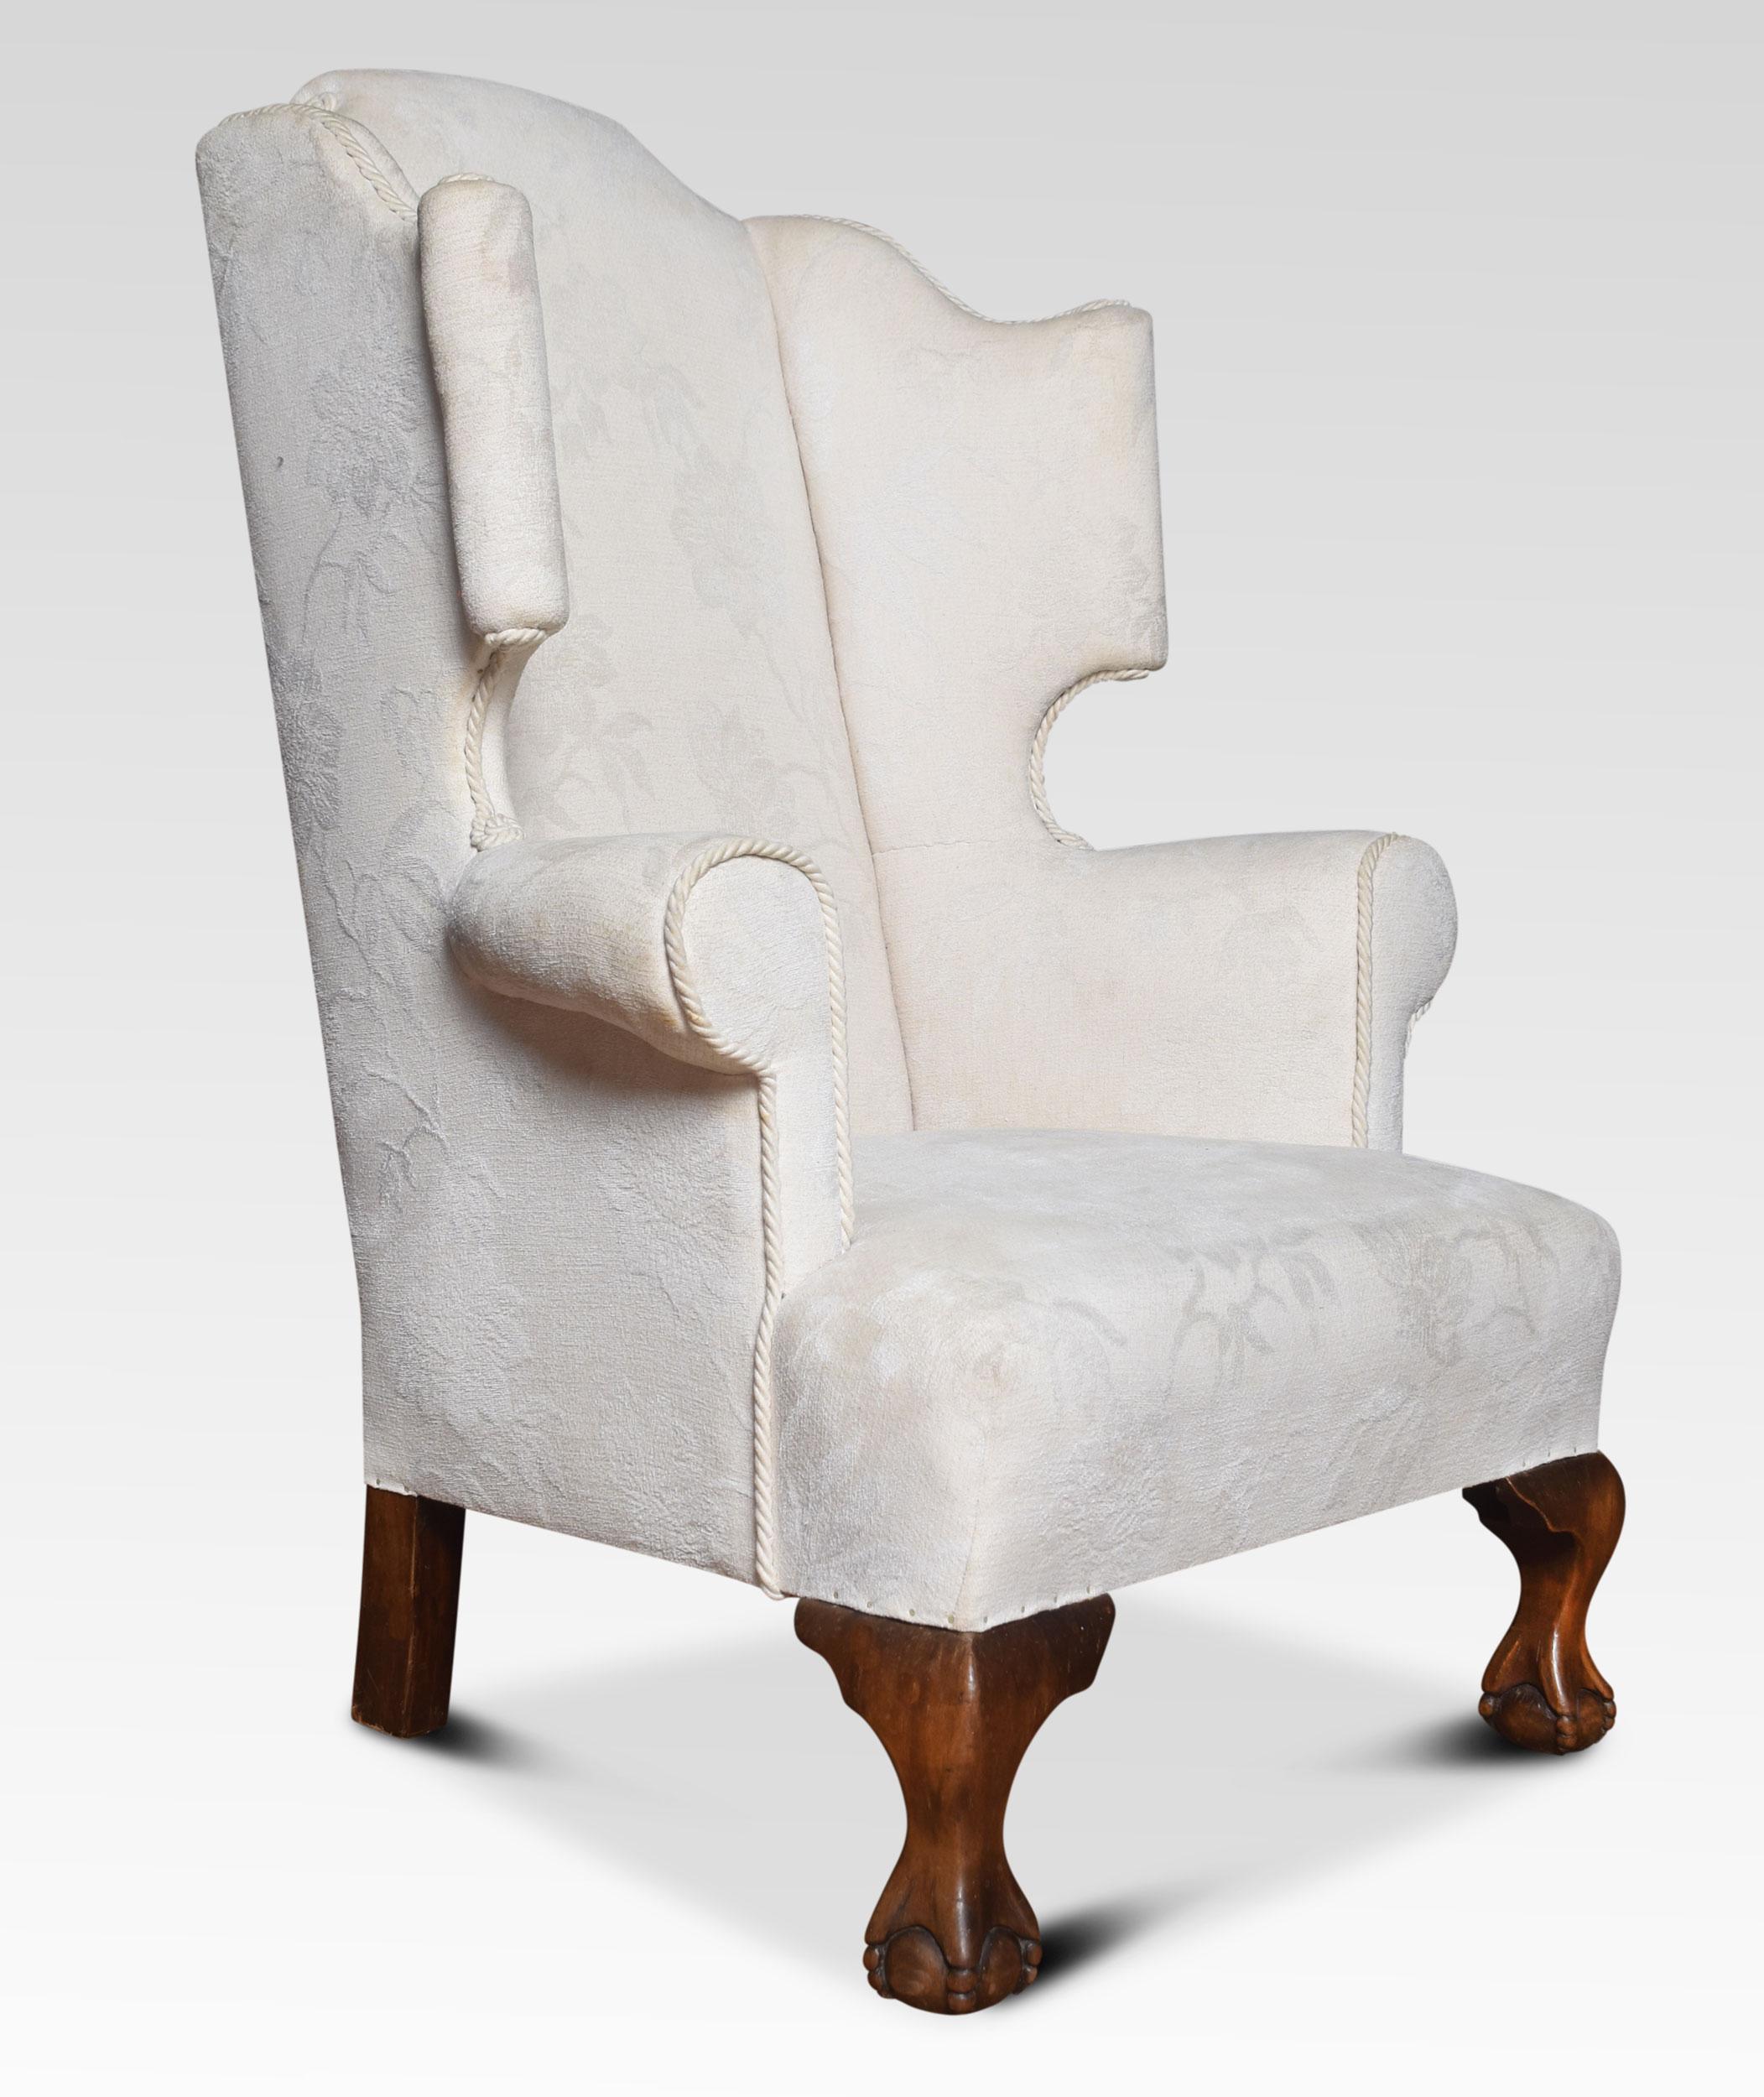 Oversized mahogany framed wing armchair of generous proportions, the shaped top above upholstered back, arms and seat ( the fabric is serviceable but has some marks). All raised up on squat cabriole front legs terminating in ball and claw